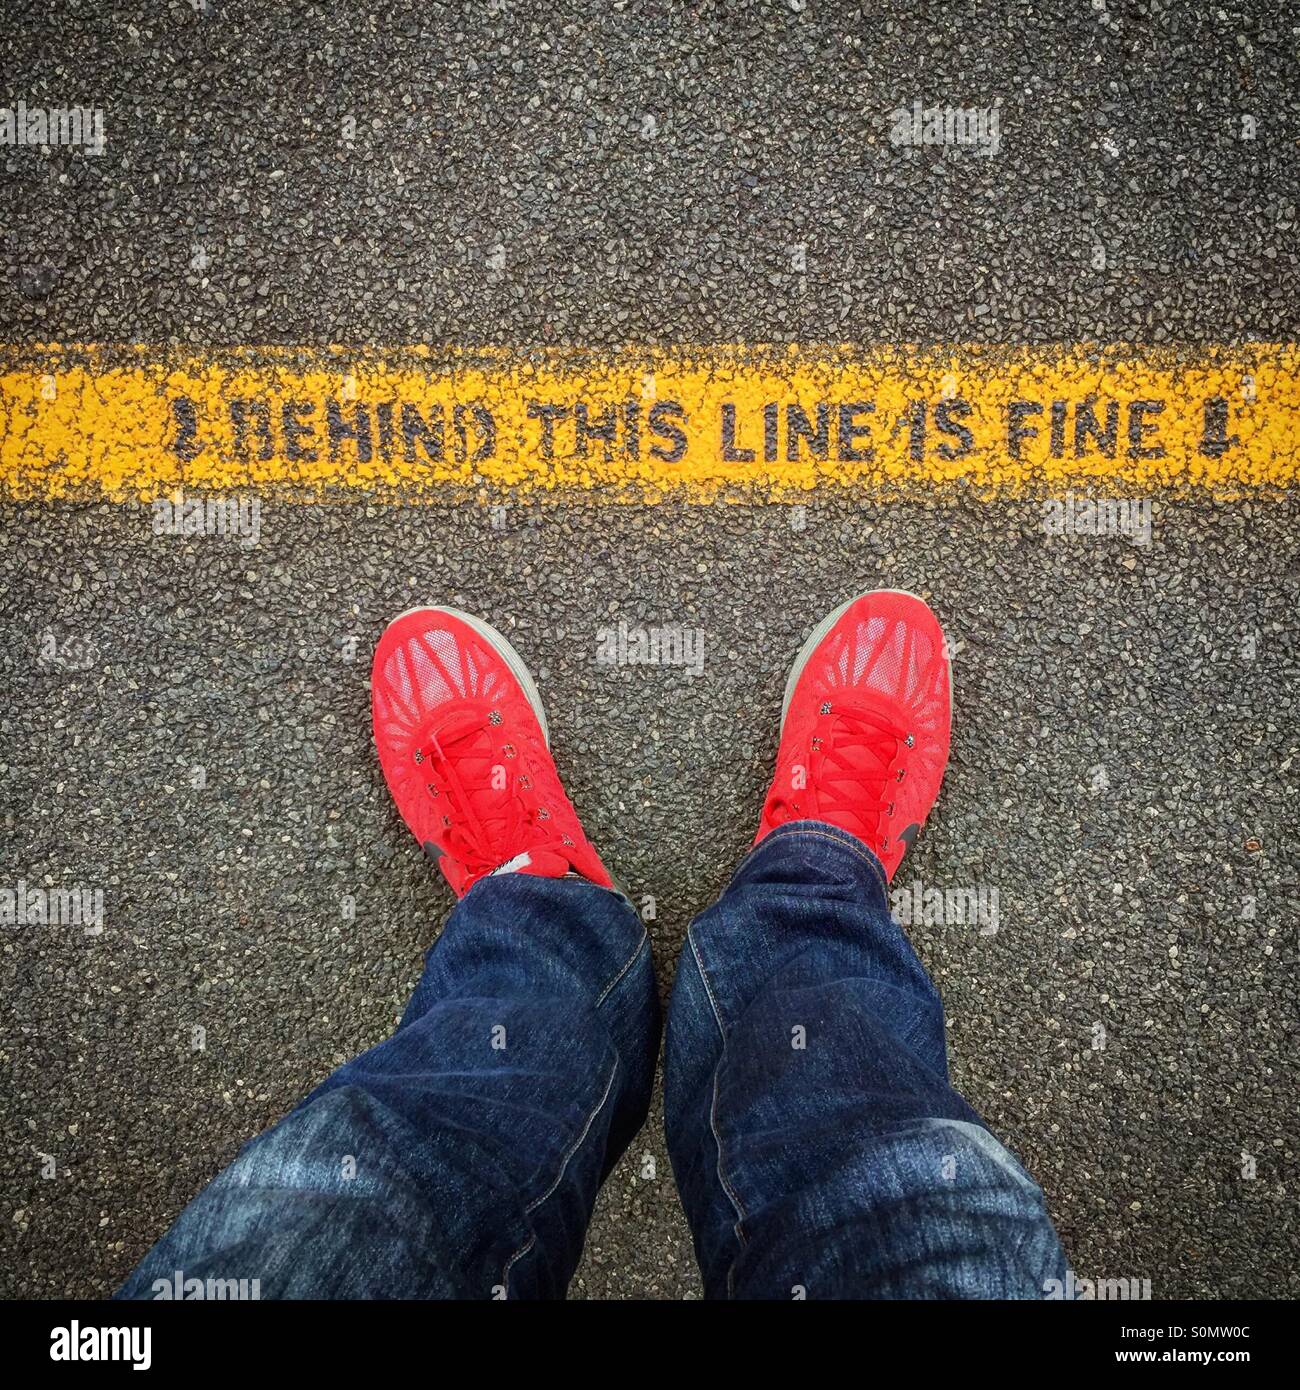 Red feet next to a warning sign Stock Photo